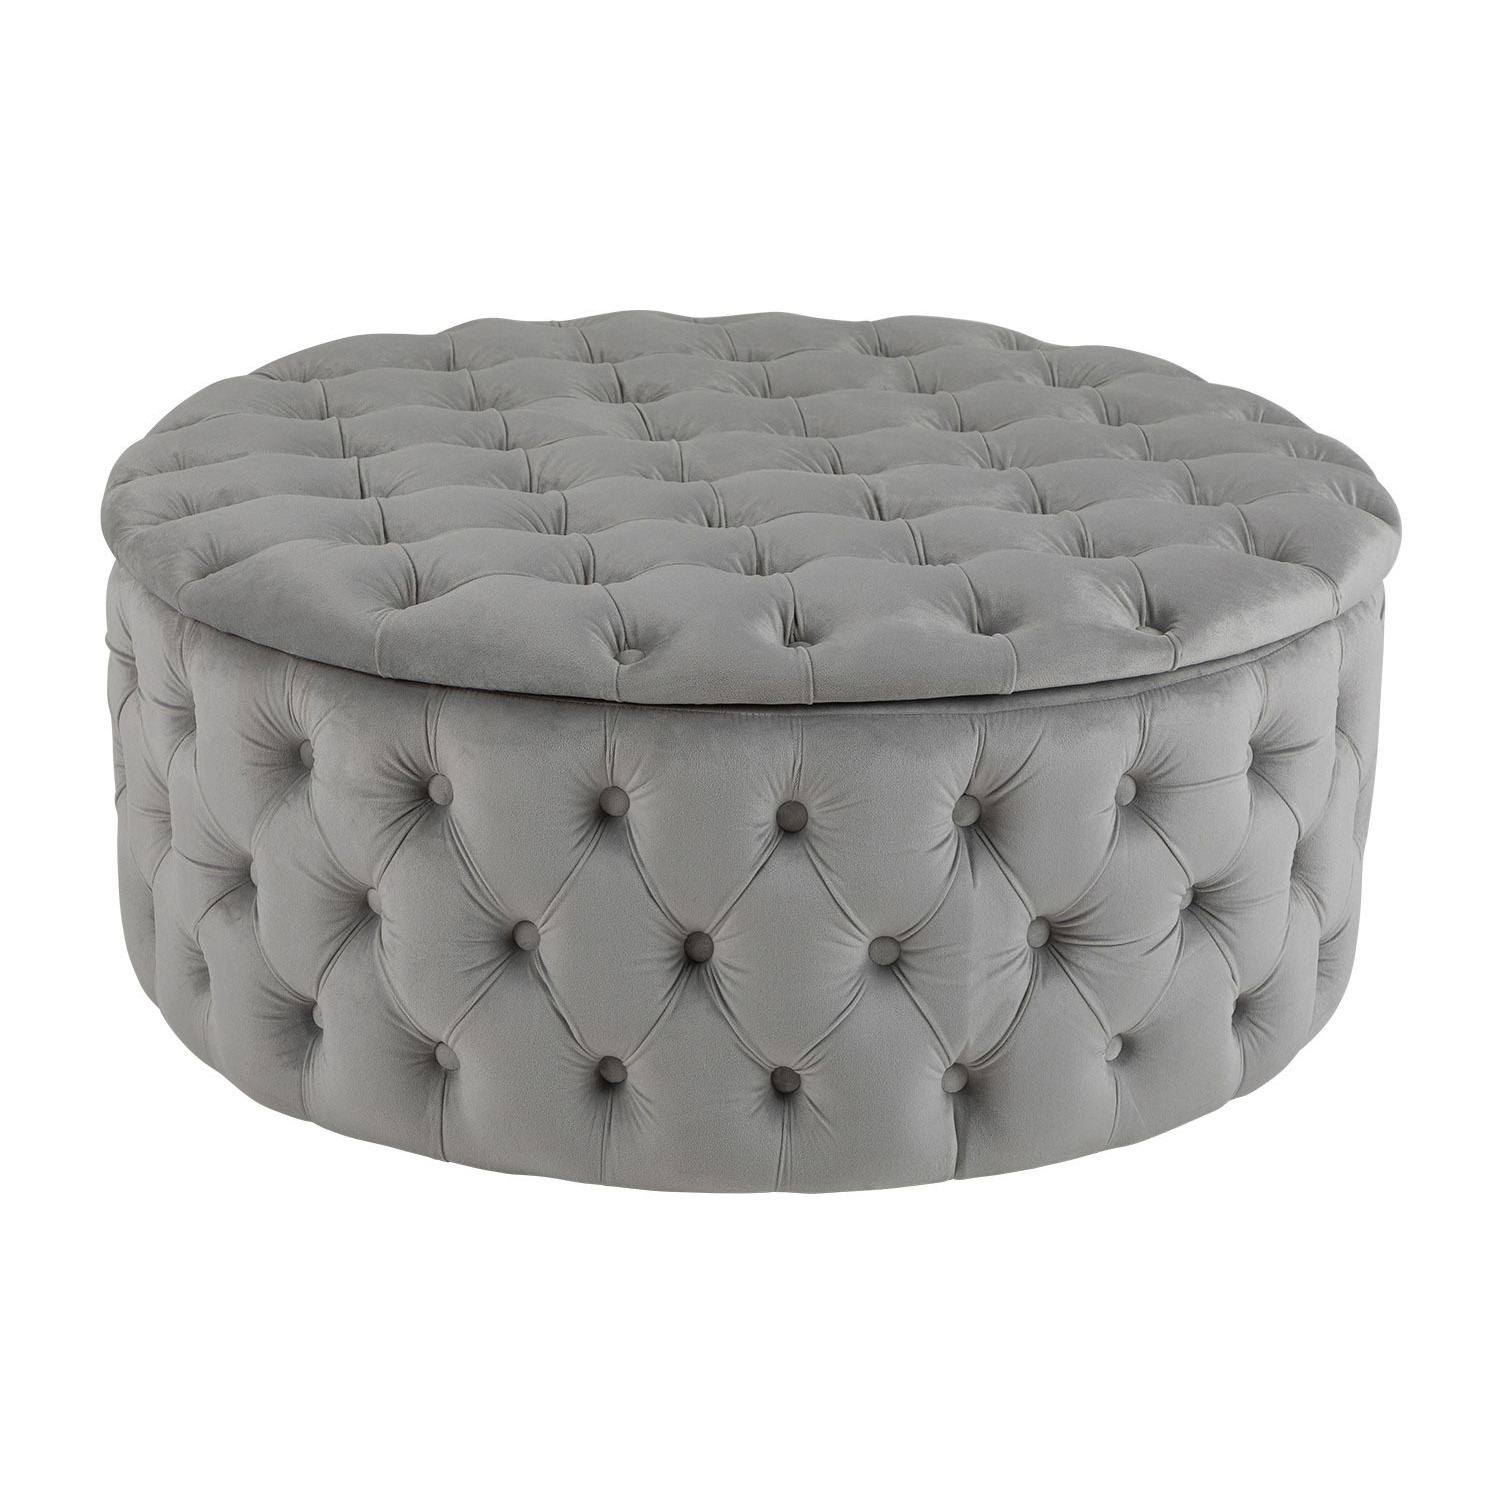 Large Round Storage Ottoman in Light Grey Velvet with Button Top - Mia - image 1